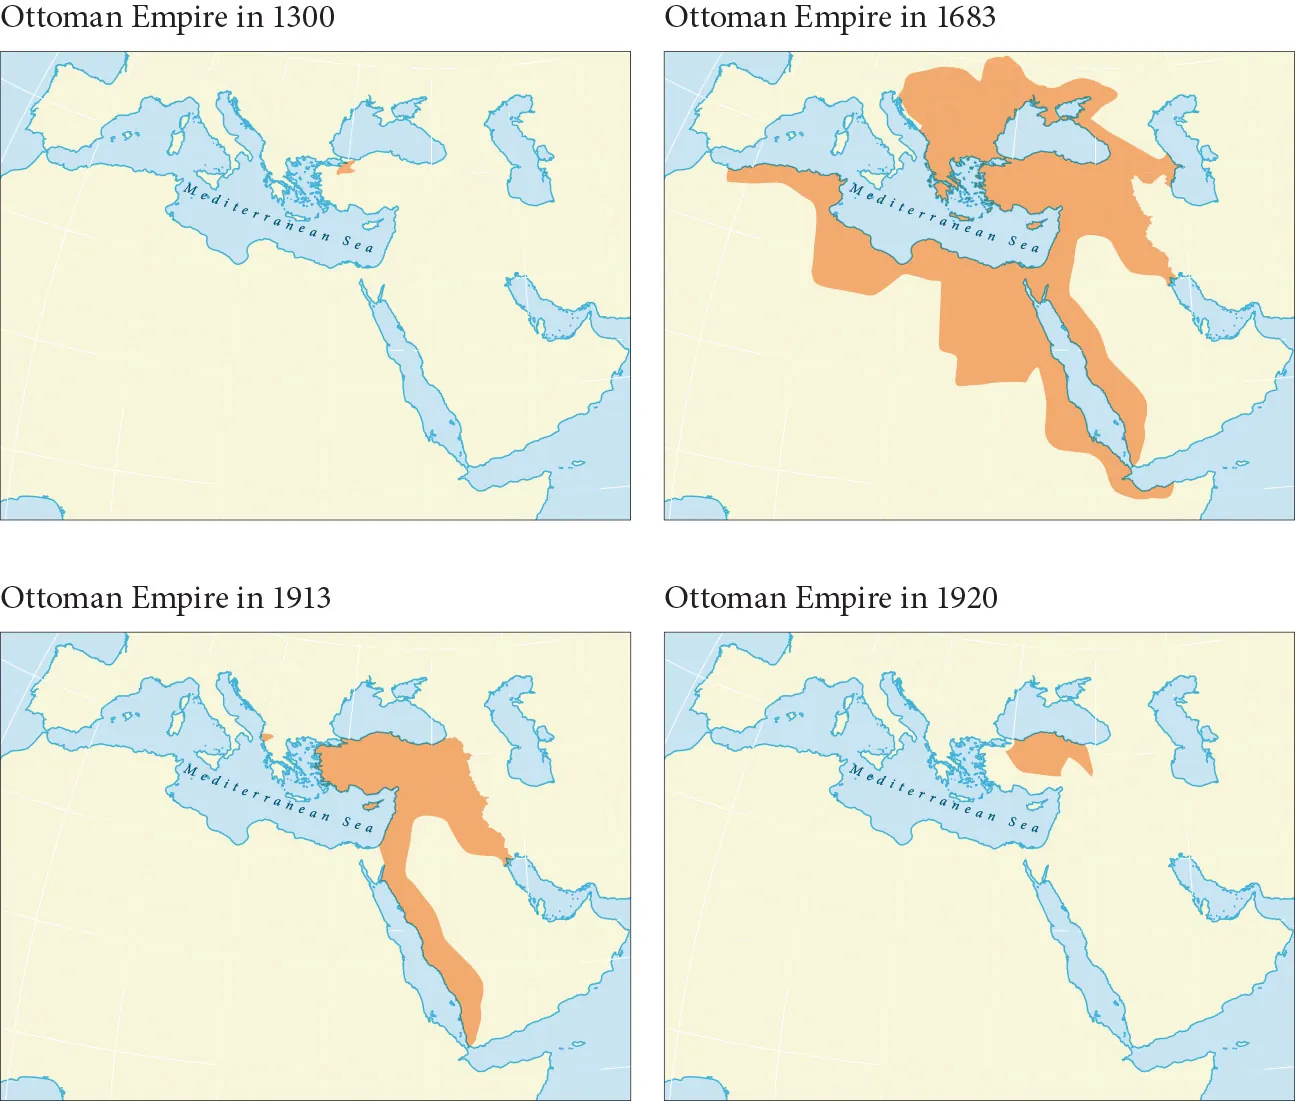 This is a series of four maps showing the geographic evolution of the Ottoman Empire. In 1300, the empire was a small region on the southern coast of the Black Sea. In 1683, the empire’s borders stretch from the north African coast to the coasts of the Red Sea to the coasts of the Black Sea. In 1913, the empire has decreased to the eastern coast of the Red Sea and the southern coast of the Black Sea. In 1920, the empire has shrunk to a small region on the southern coast of the Black Sea.